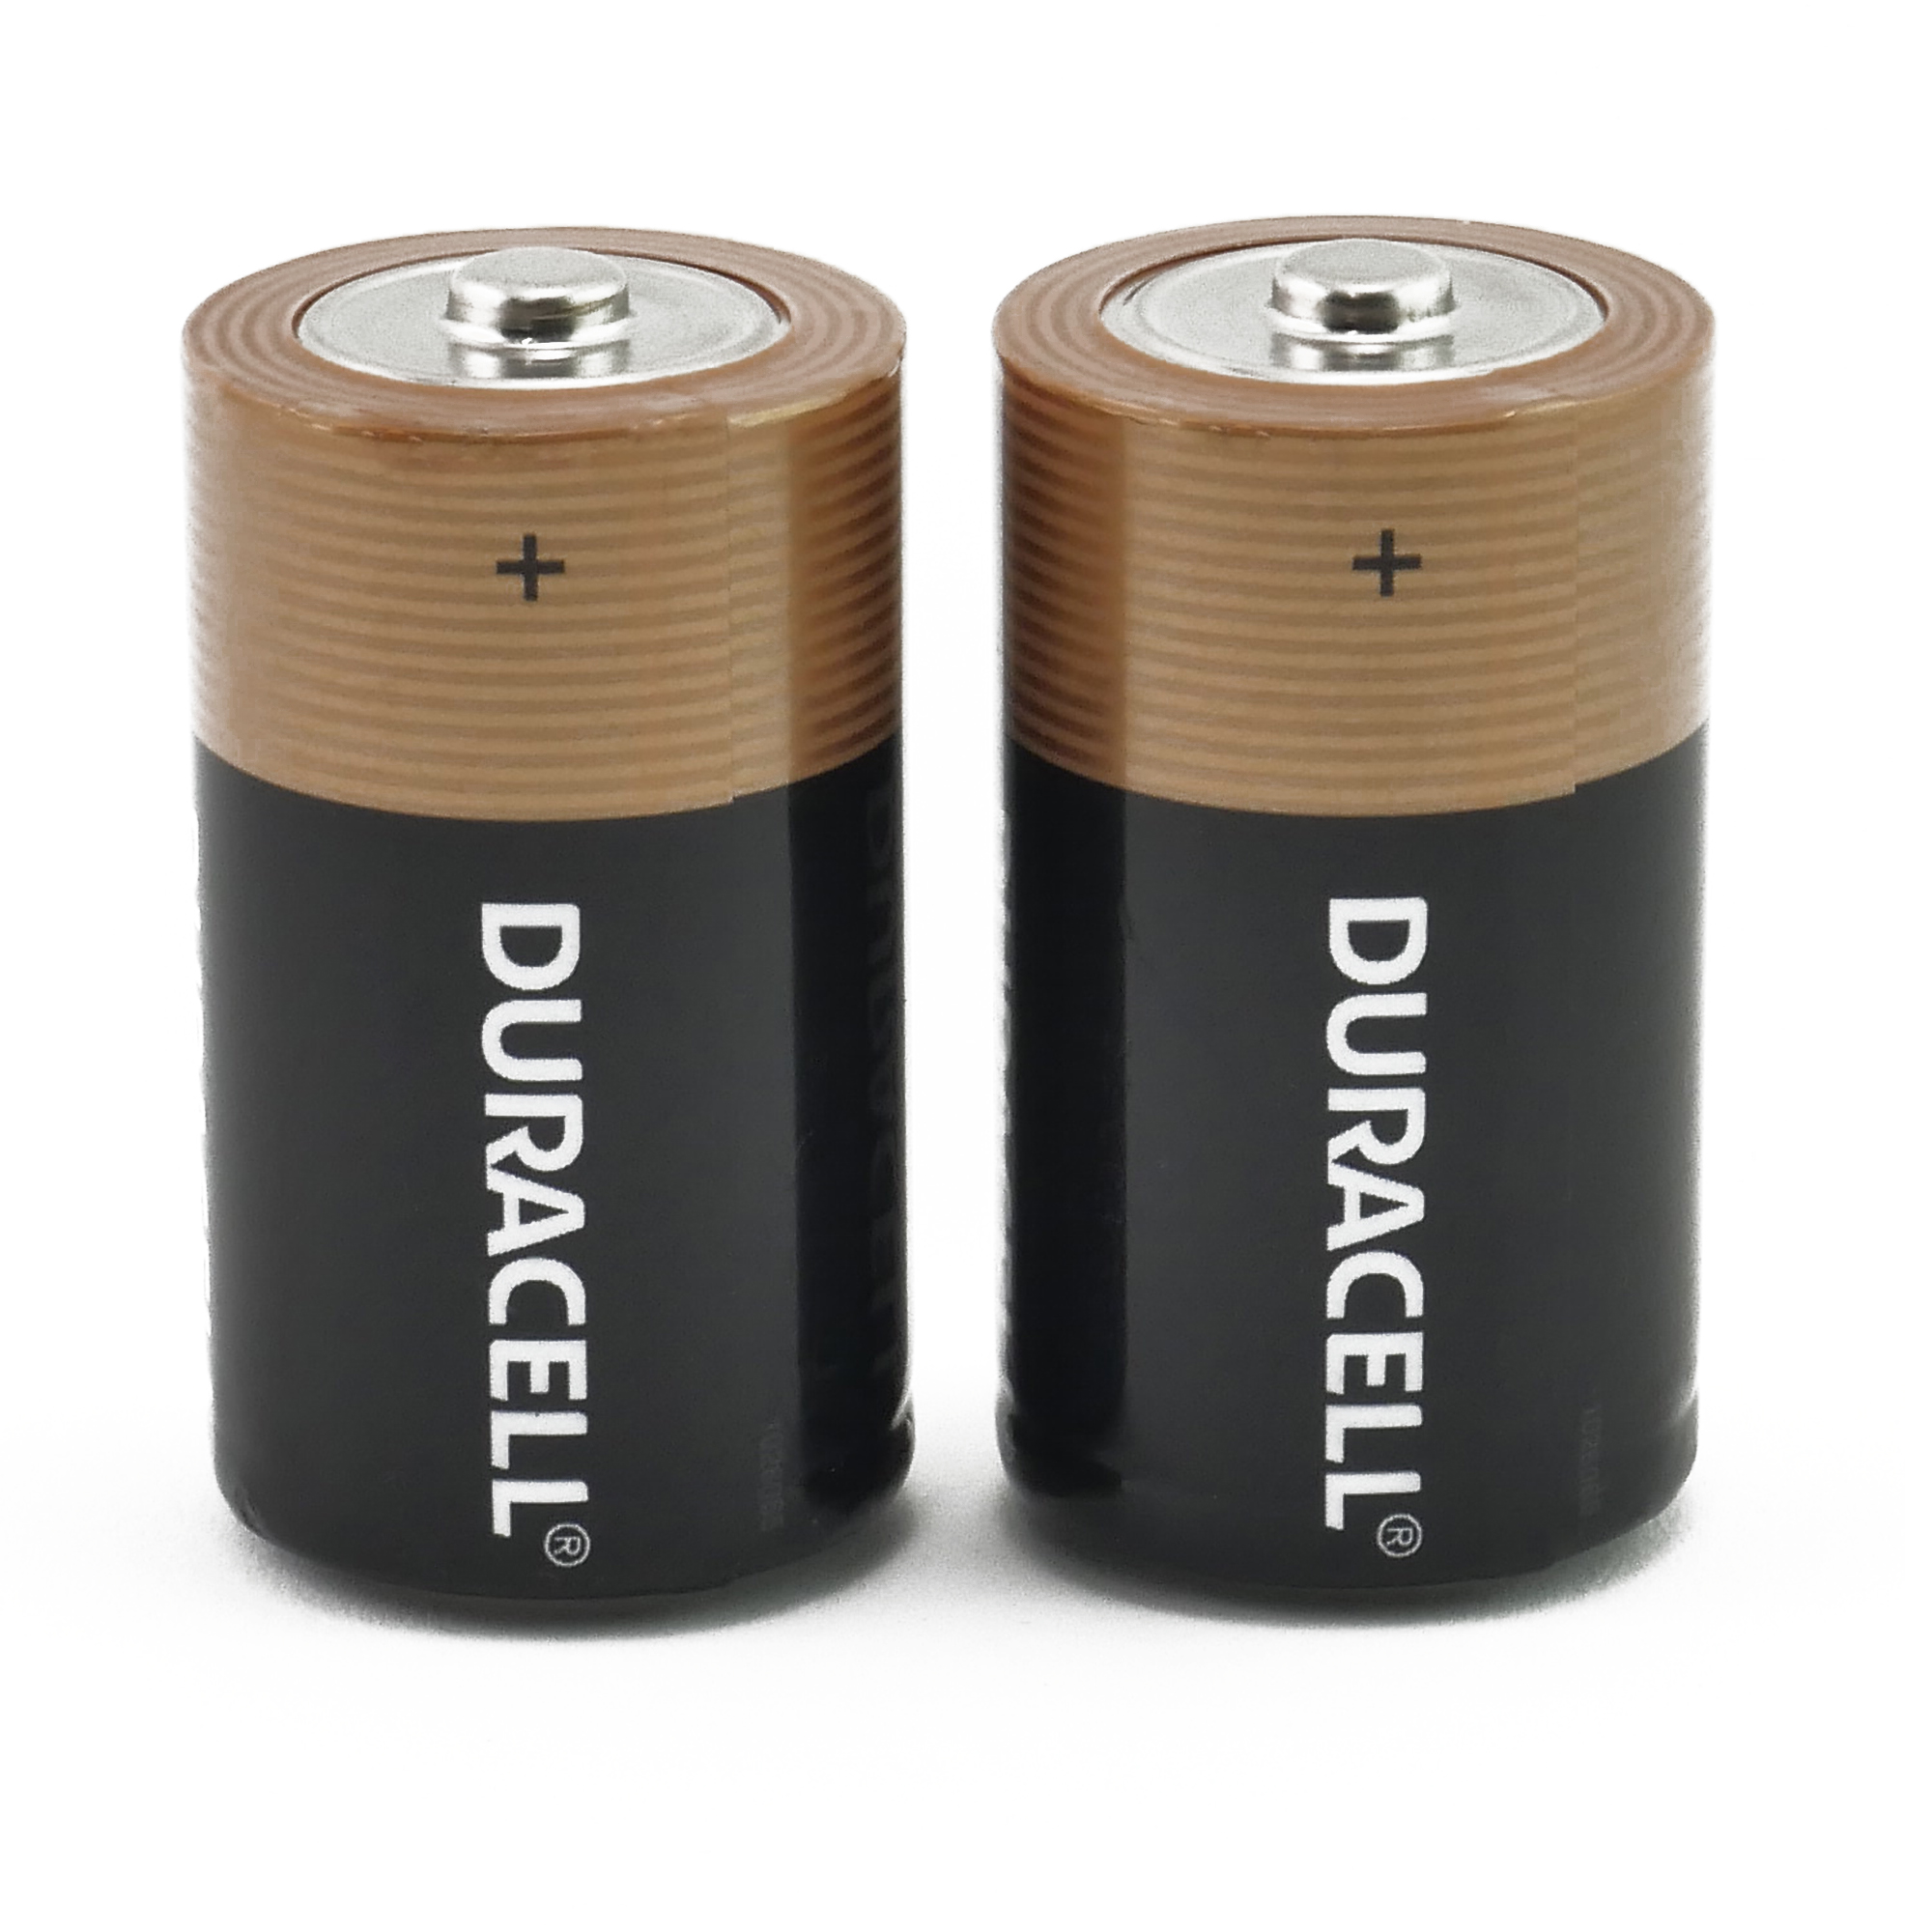 Duracell 10-Year Batteries, D Cell